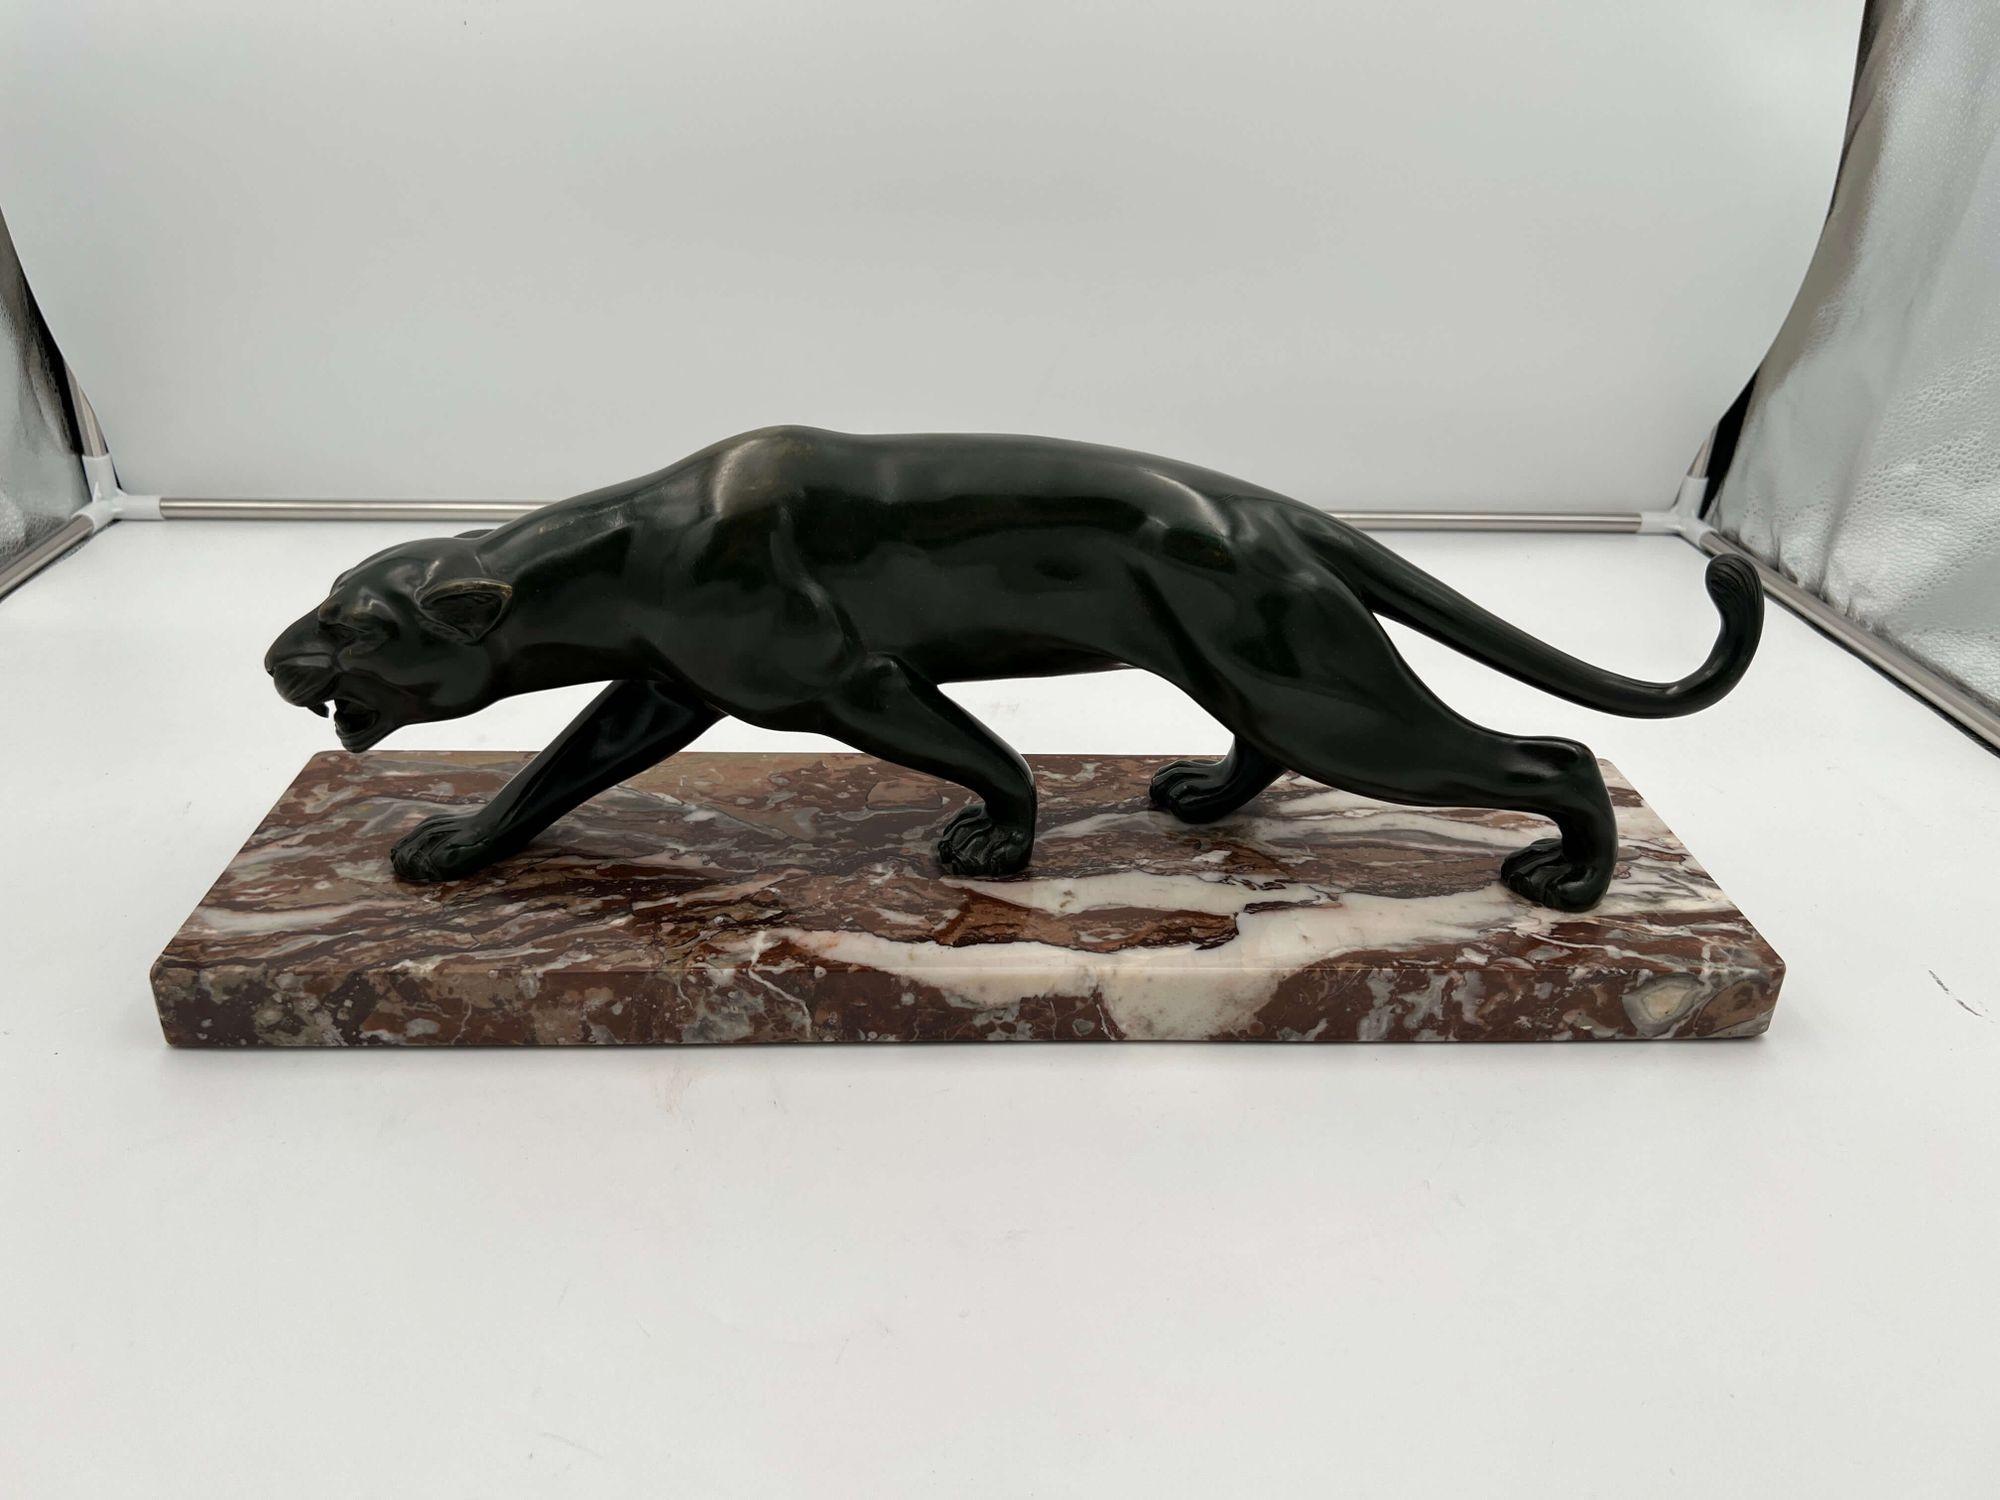 Very elegant Art Deco bronze sculpture of a striding panther from France about 1930.
Signed on the leg by sculptor Salvatore Melani (1902 - 1934). Bronze, greenish patina. Red marble base.
Dimensions: H 19 cm x W 55 cm x D 16 cm (incl. marble plinth)